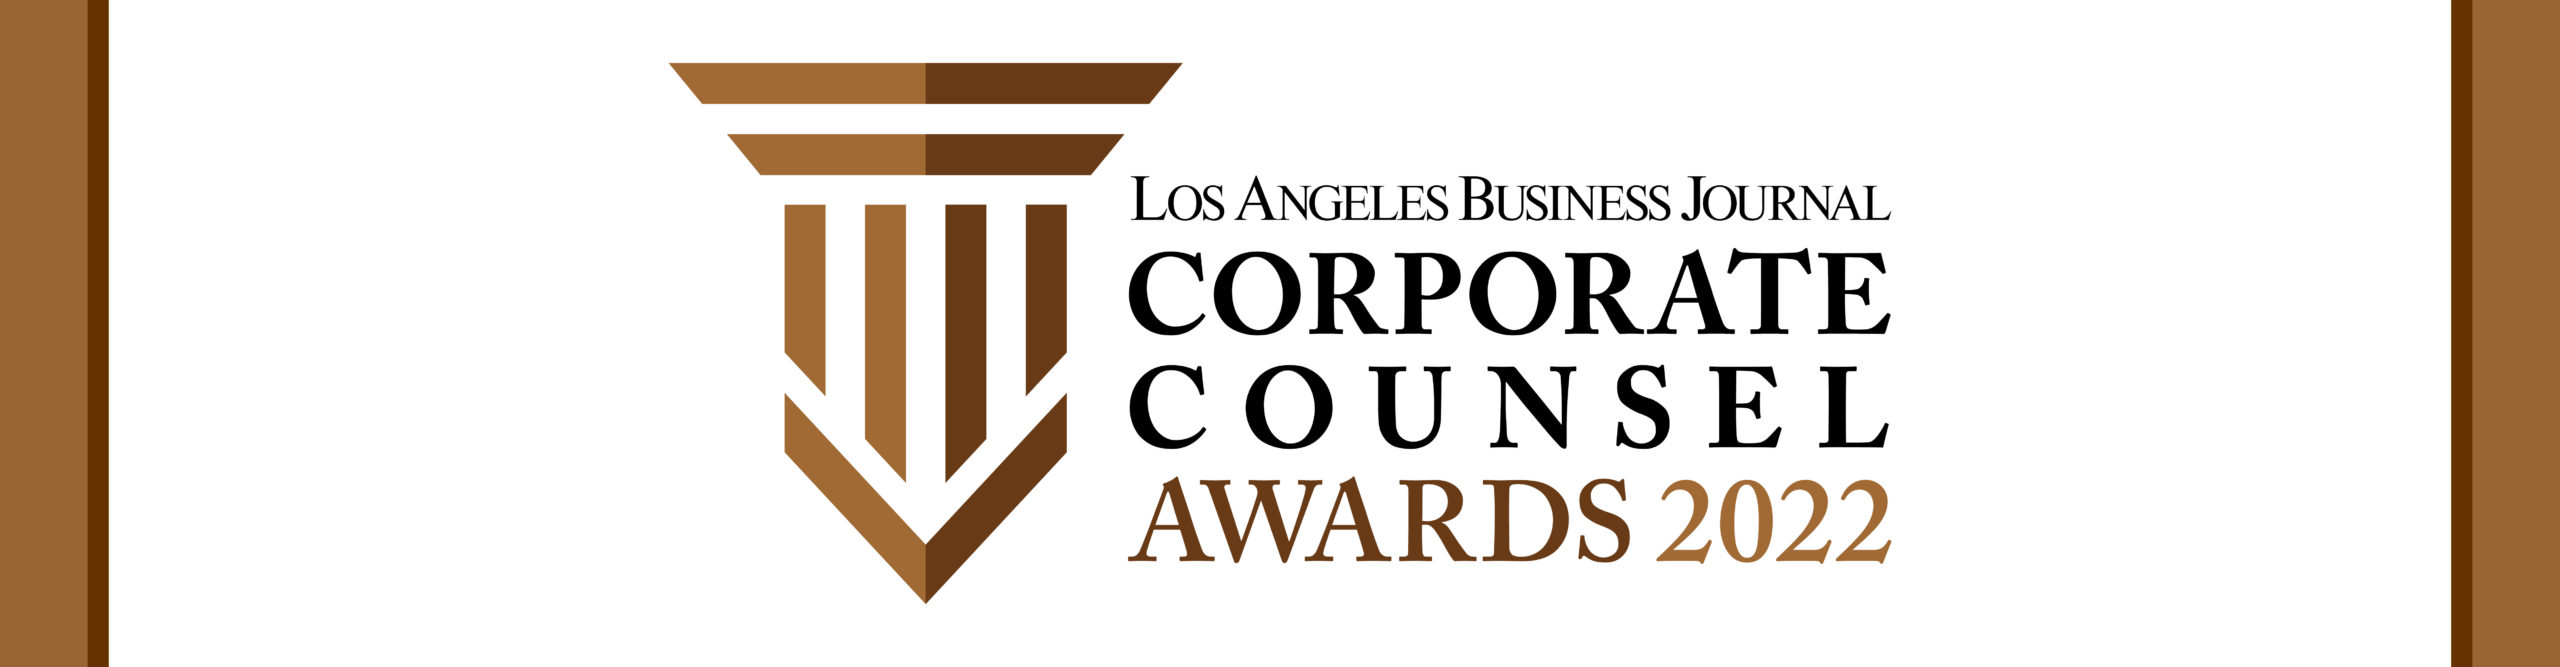 Corporate Counsel Awards Event Banner